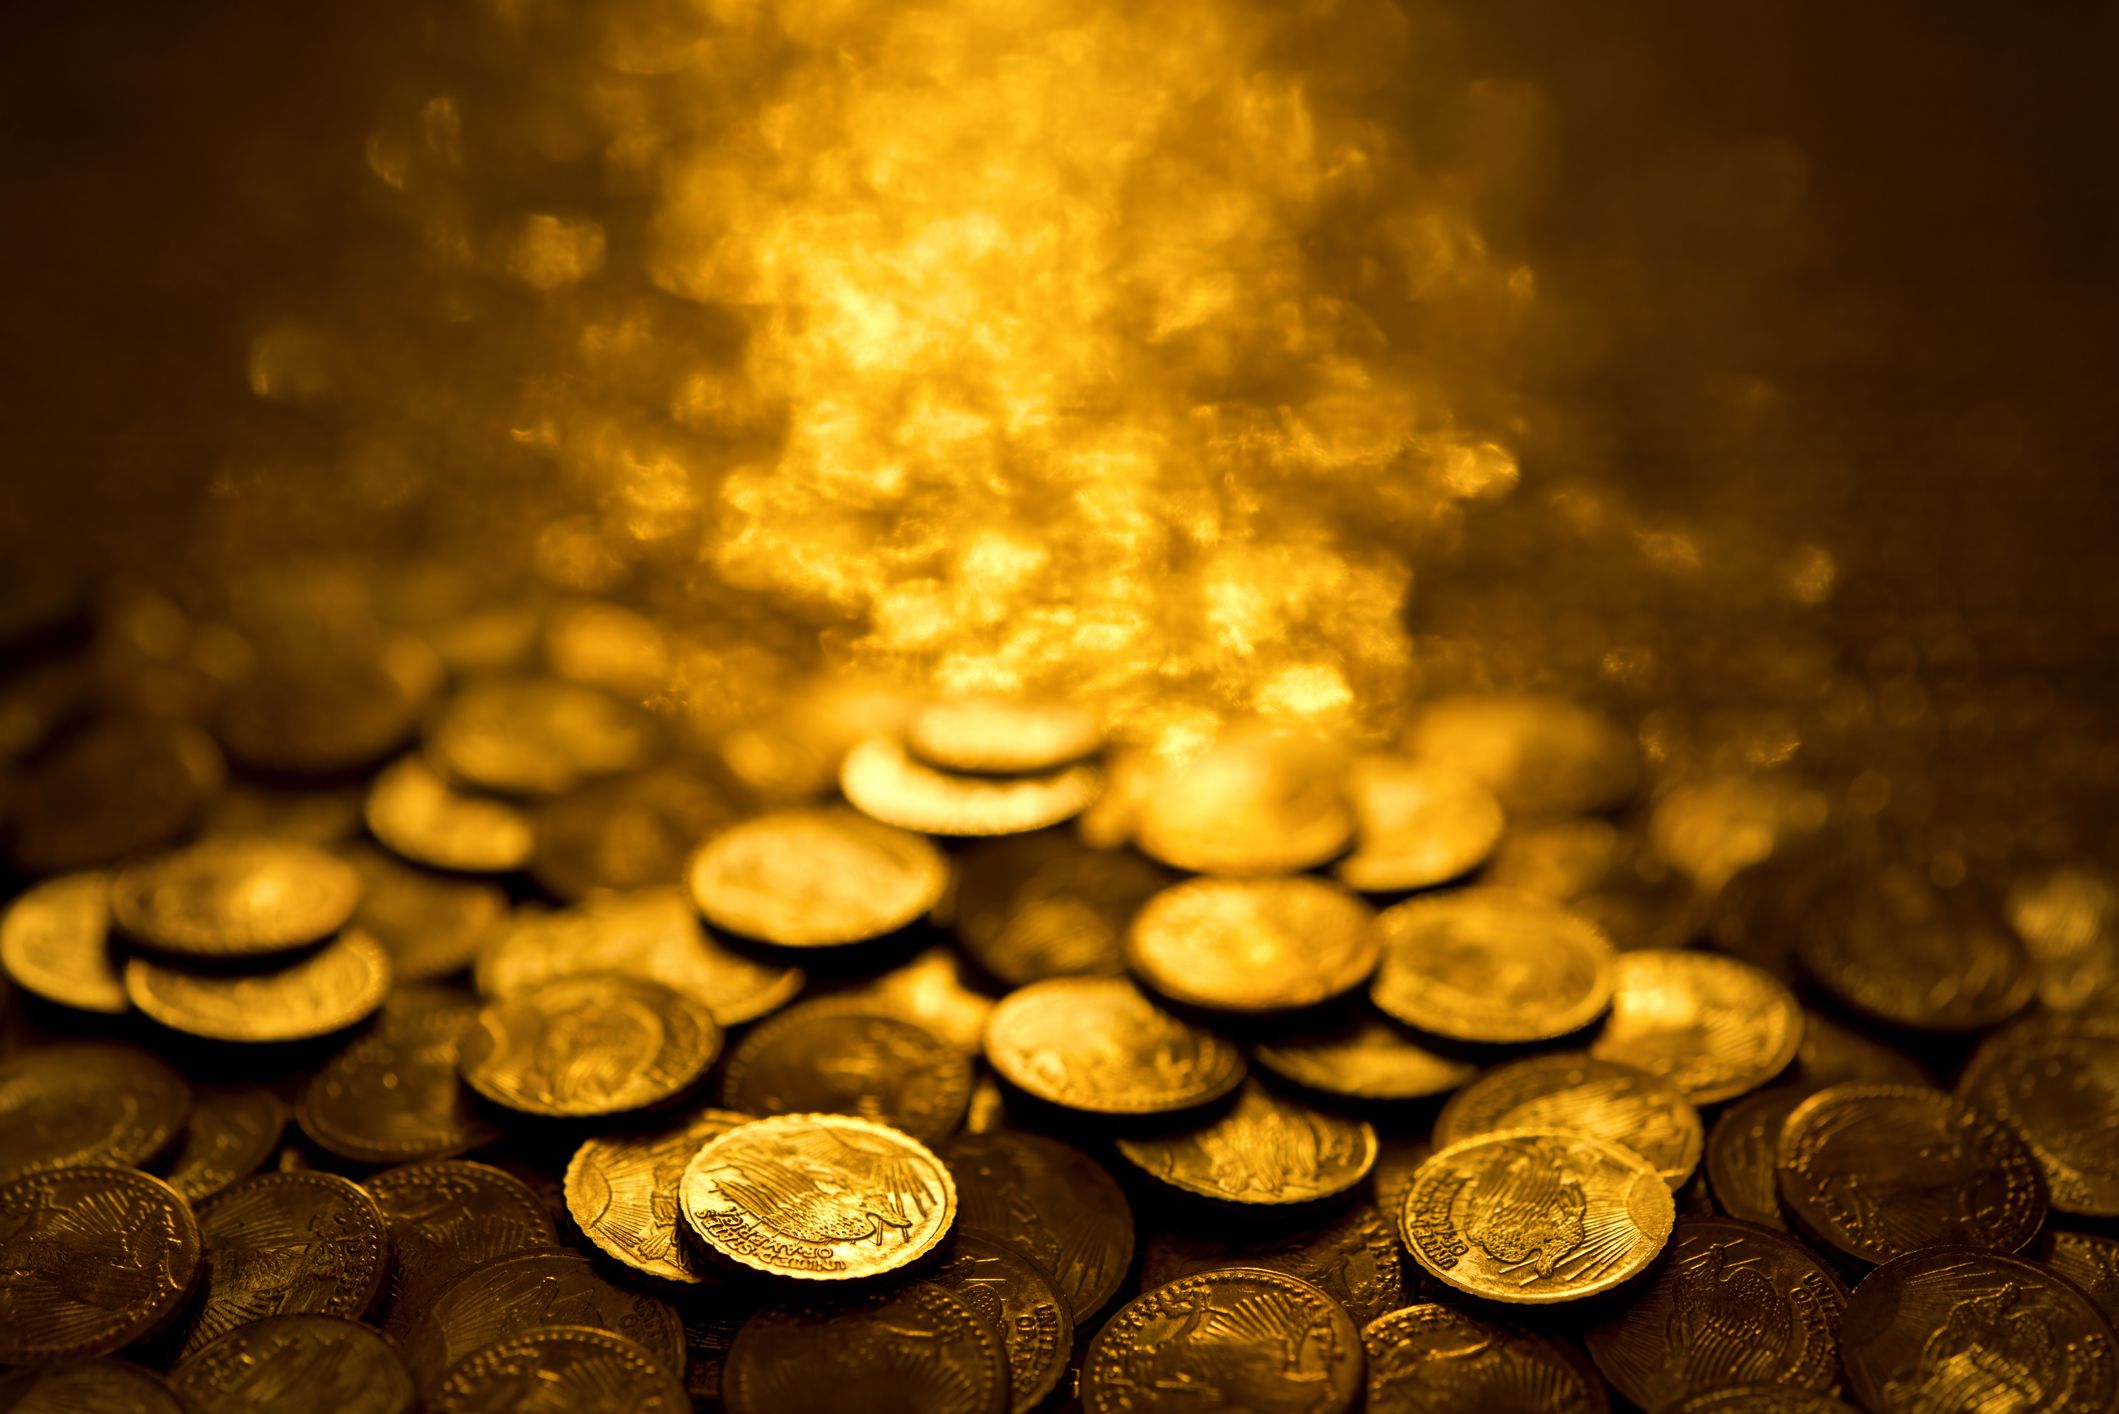 Coins worth $2 million still out there in the world ready to change people's lives